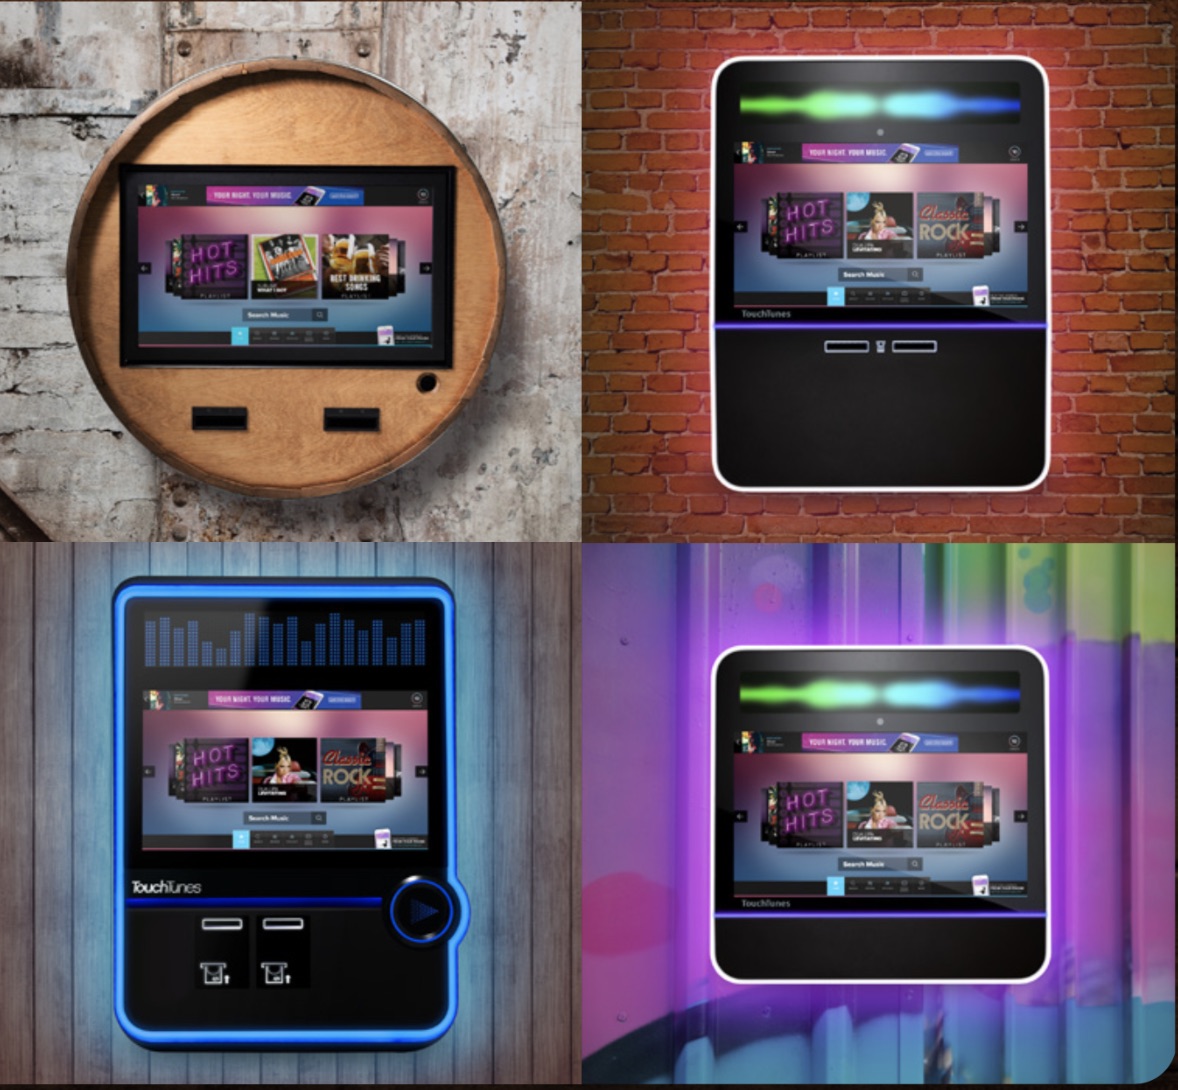 TouchTunes' current jukebox lineup